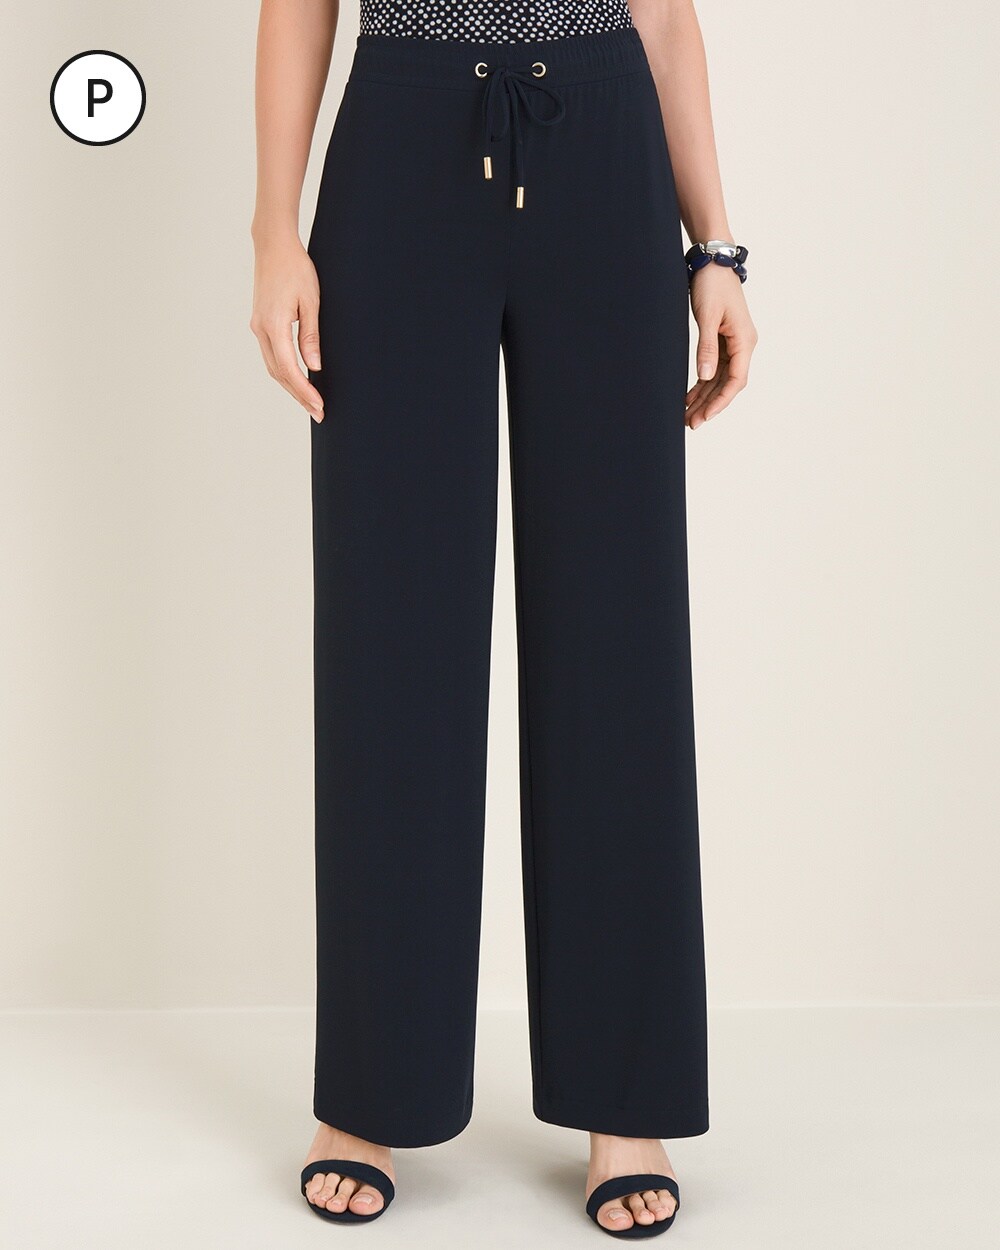 Travelers Collection Petite Jersey Pants